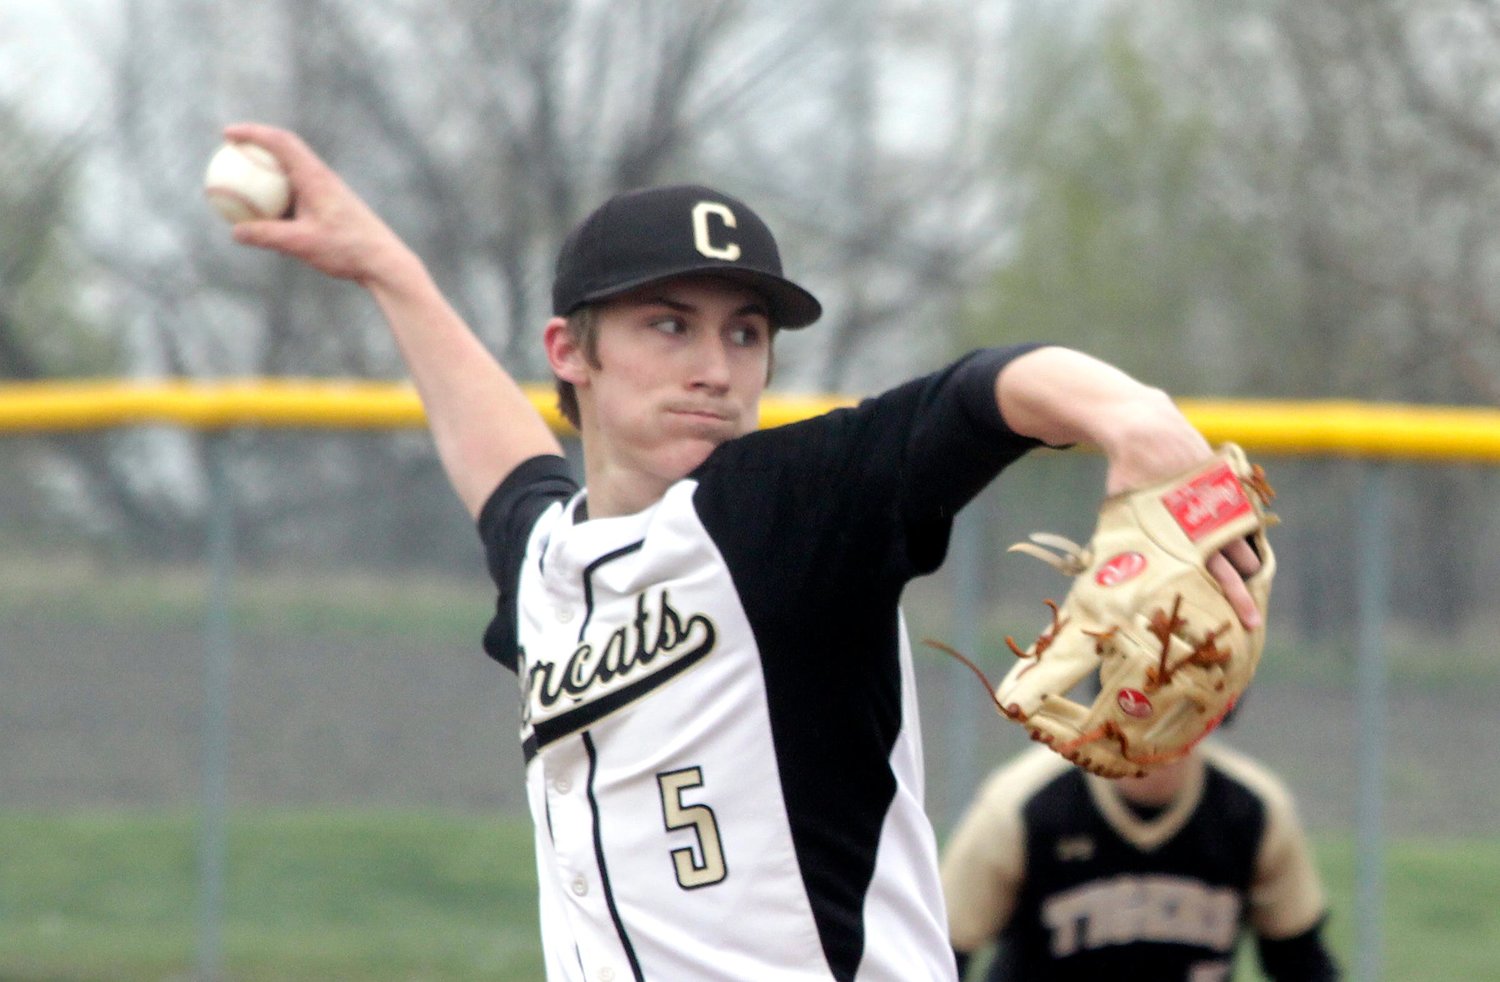 Cairo pitcher Logan Head and the Bearcats baseball team dropped a 4-2 decision in 8 innings Monday to Russellville.